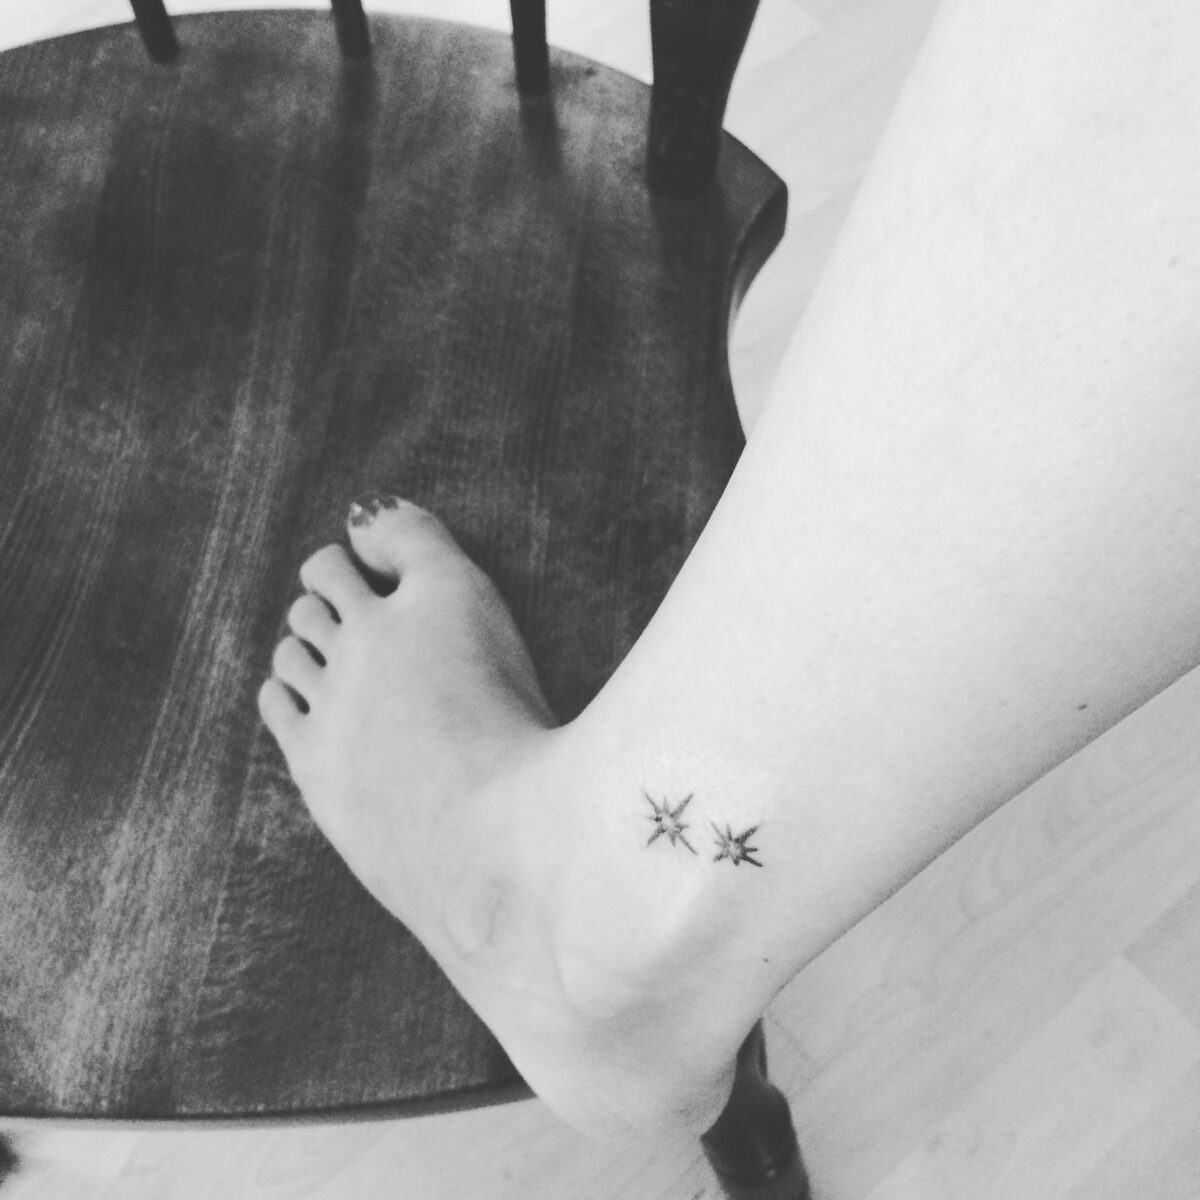 Ankle tattoo5